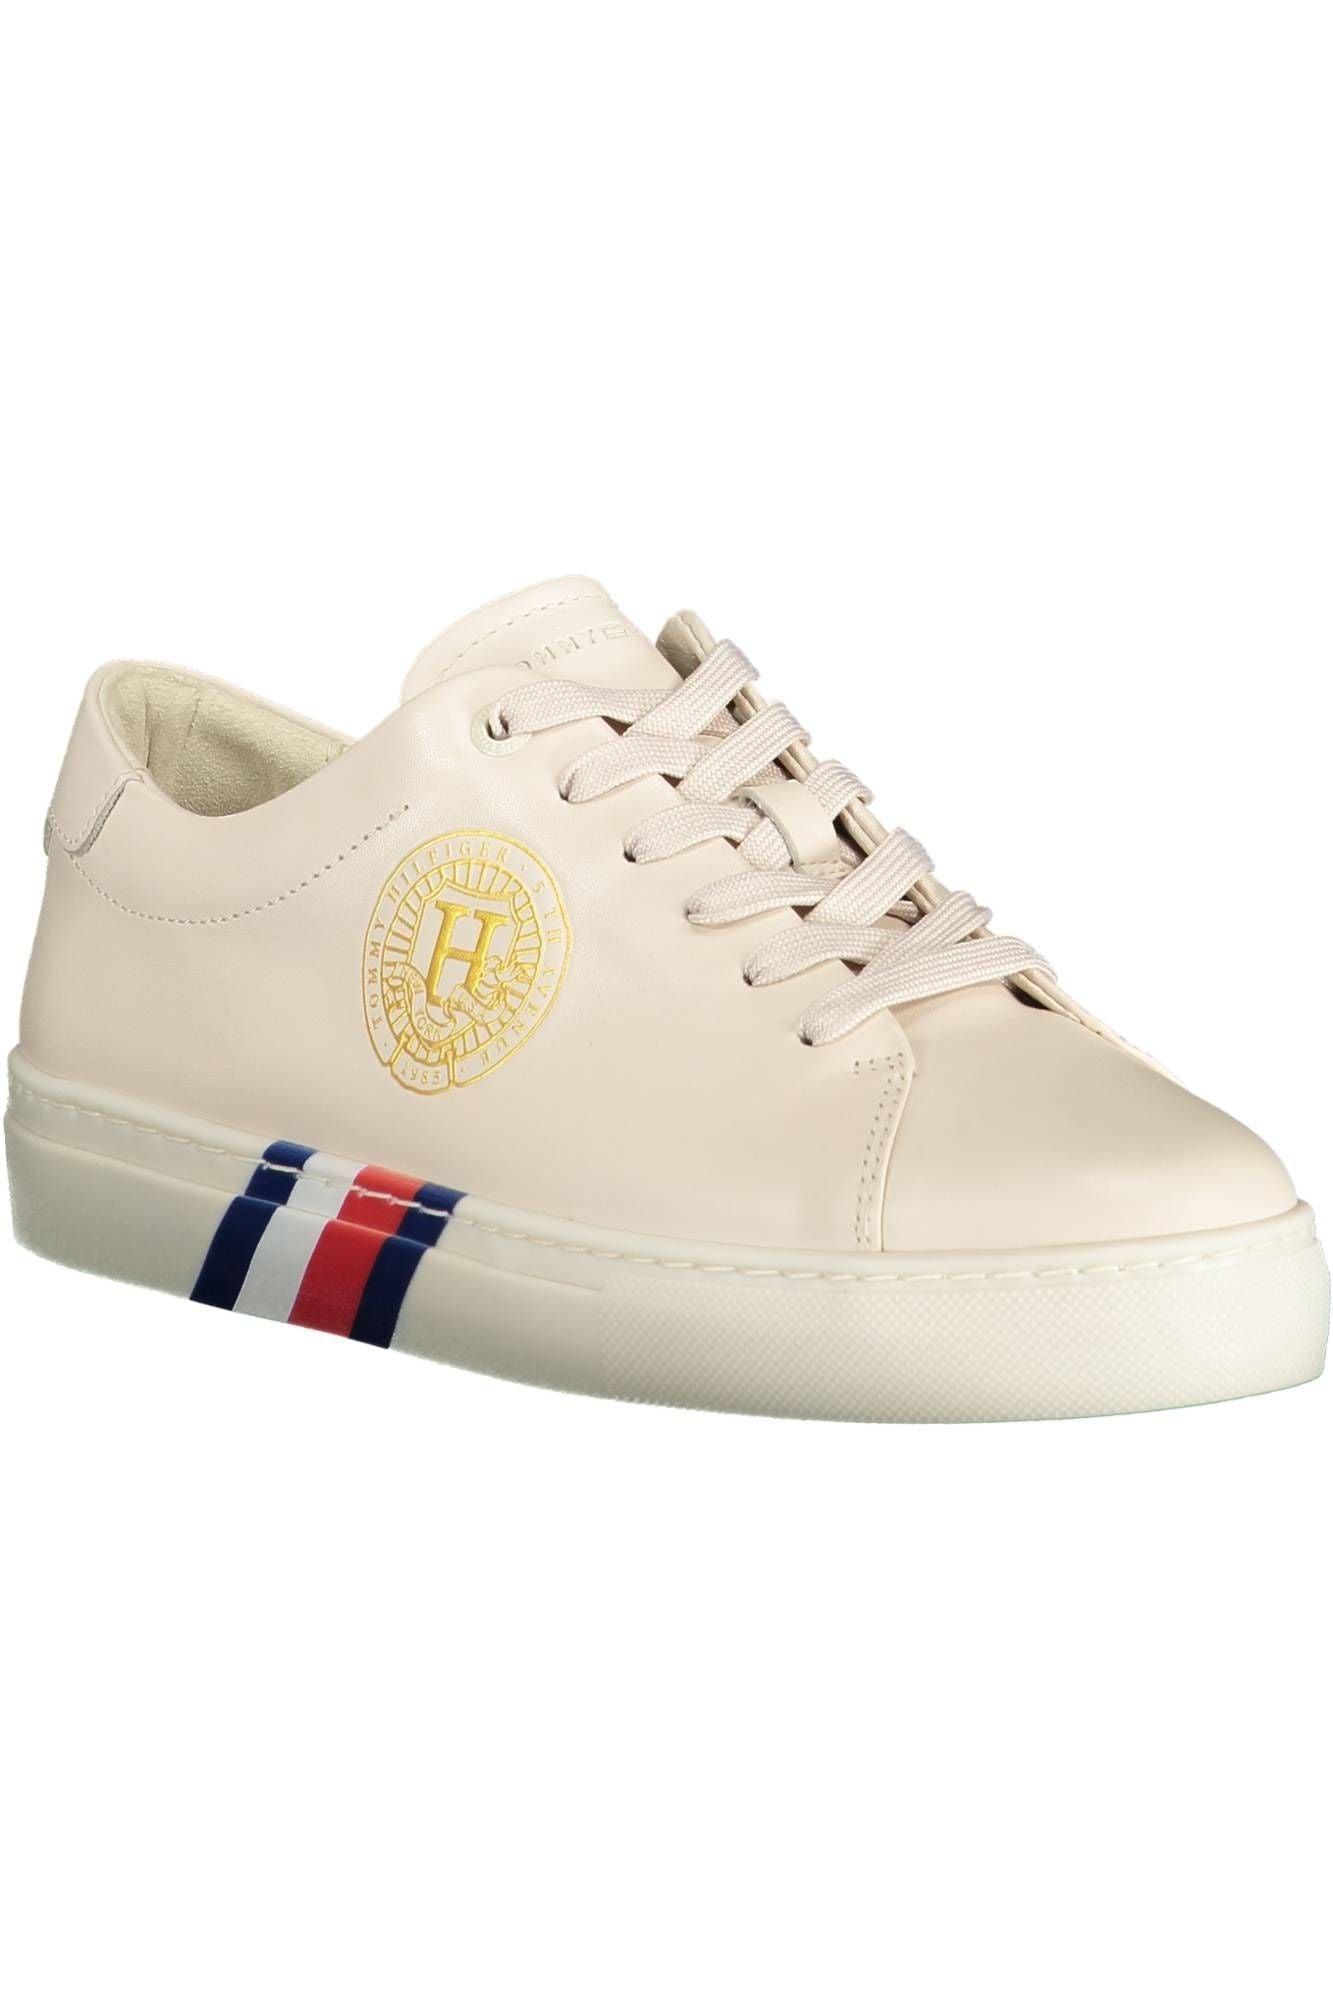 Tommy Hilfiger Beige Lace-Up Sneaker with Iconic Accents